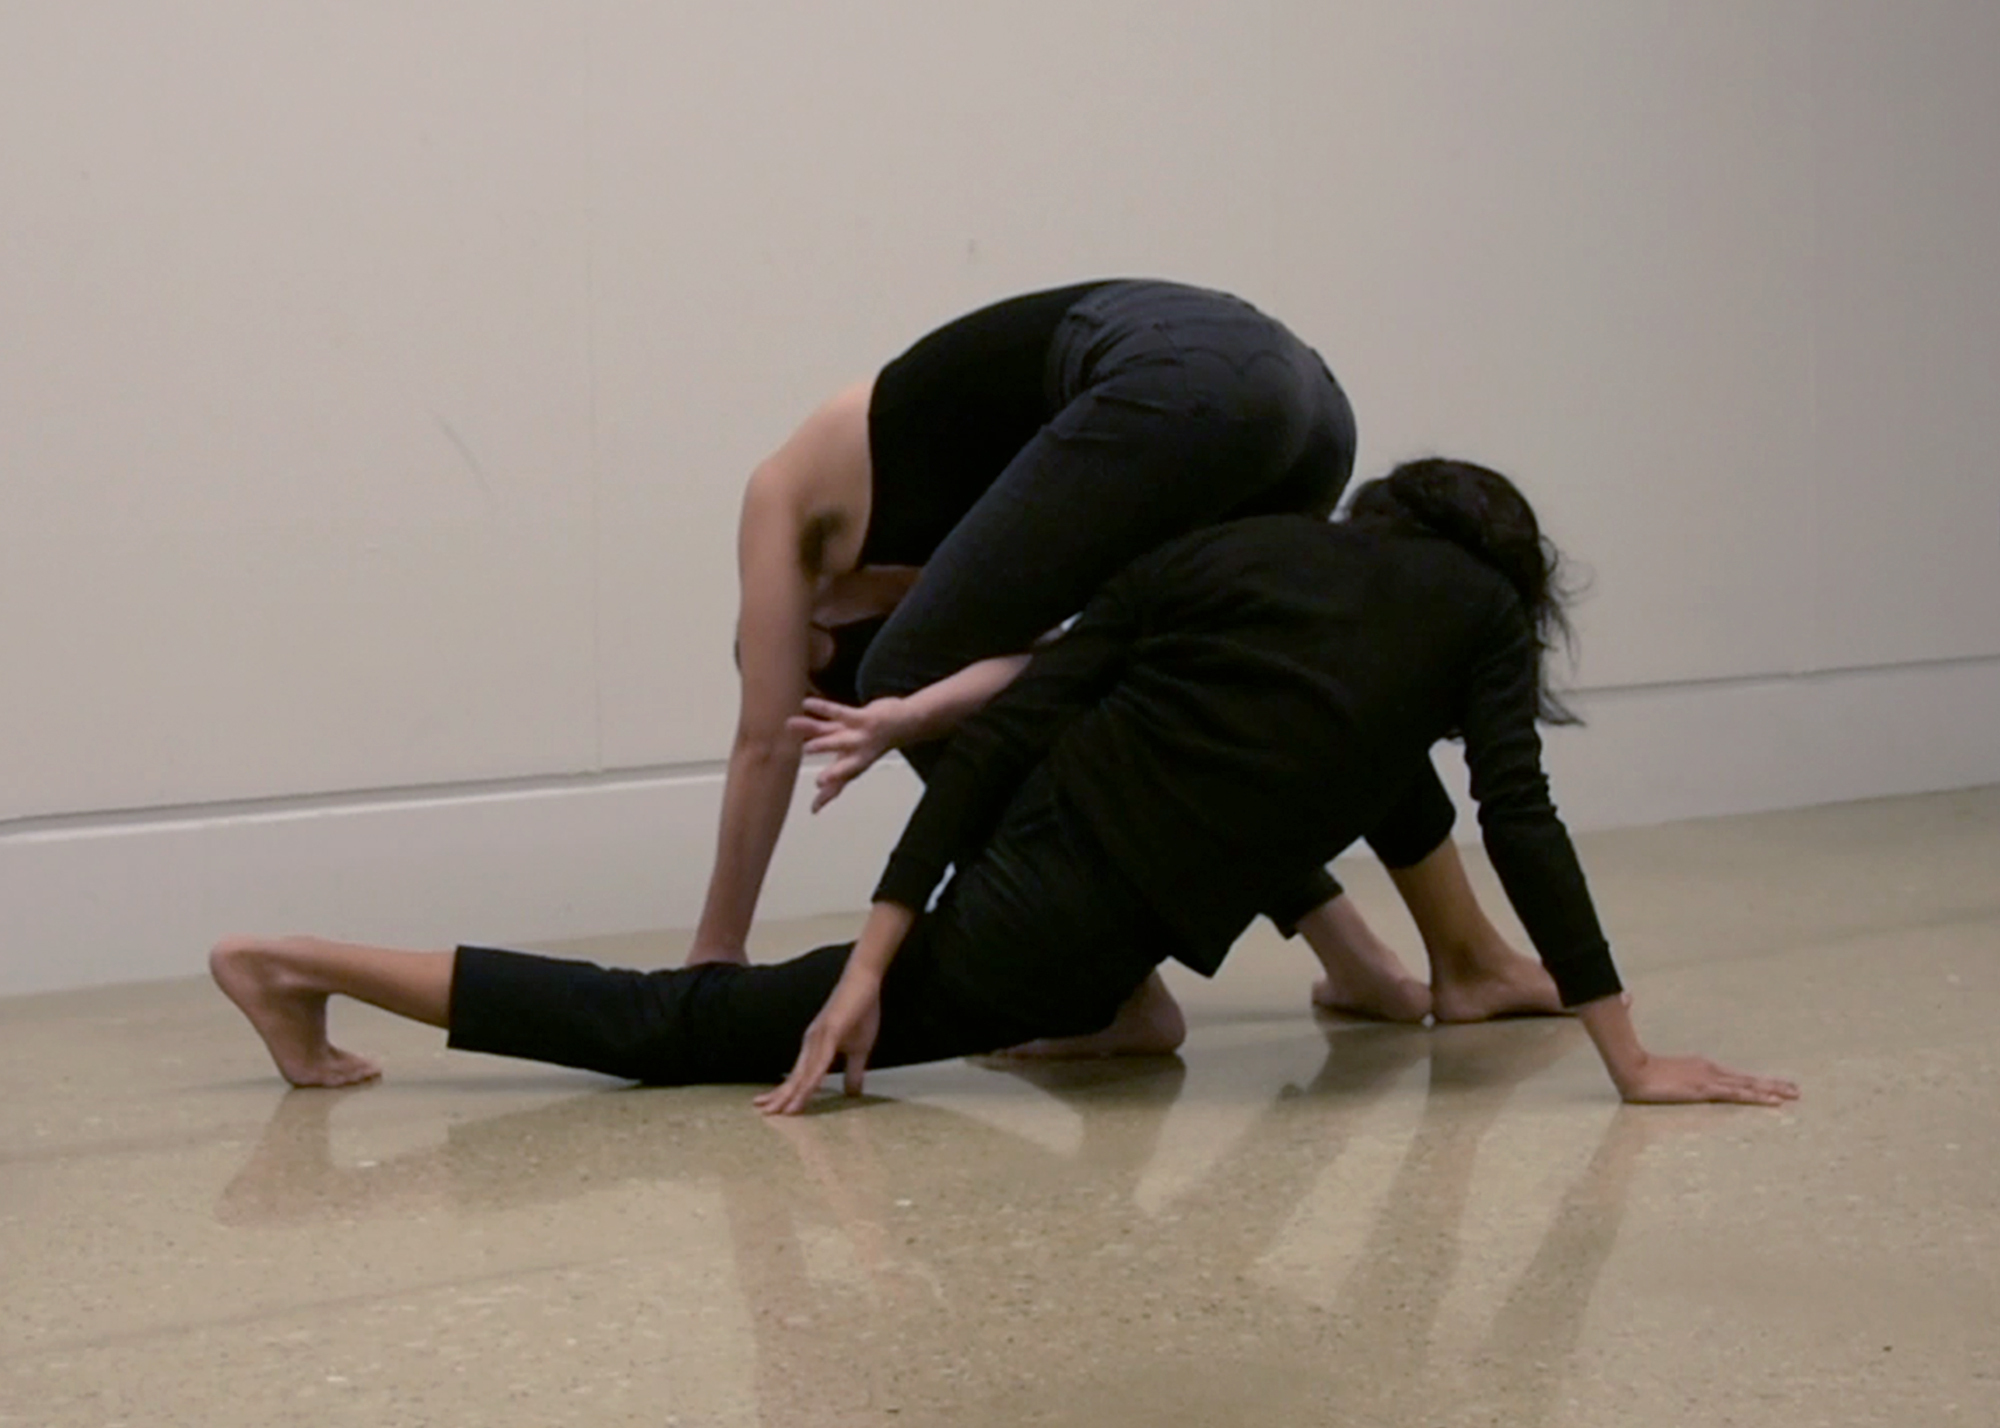 Two people dressed entirely in black entangled with each other. One of them reaches an arm between their legs, the other has all limbs touching the floor.